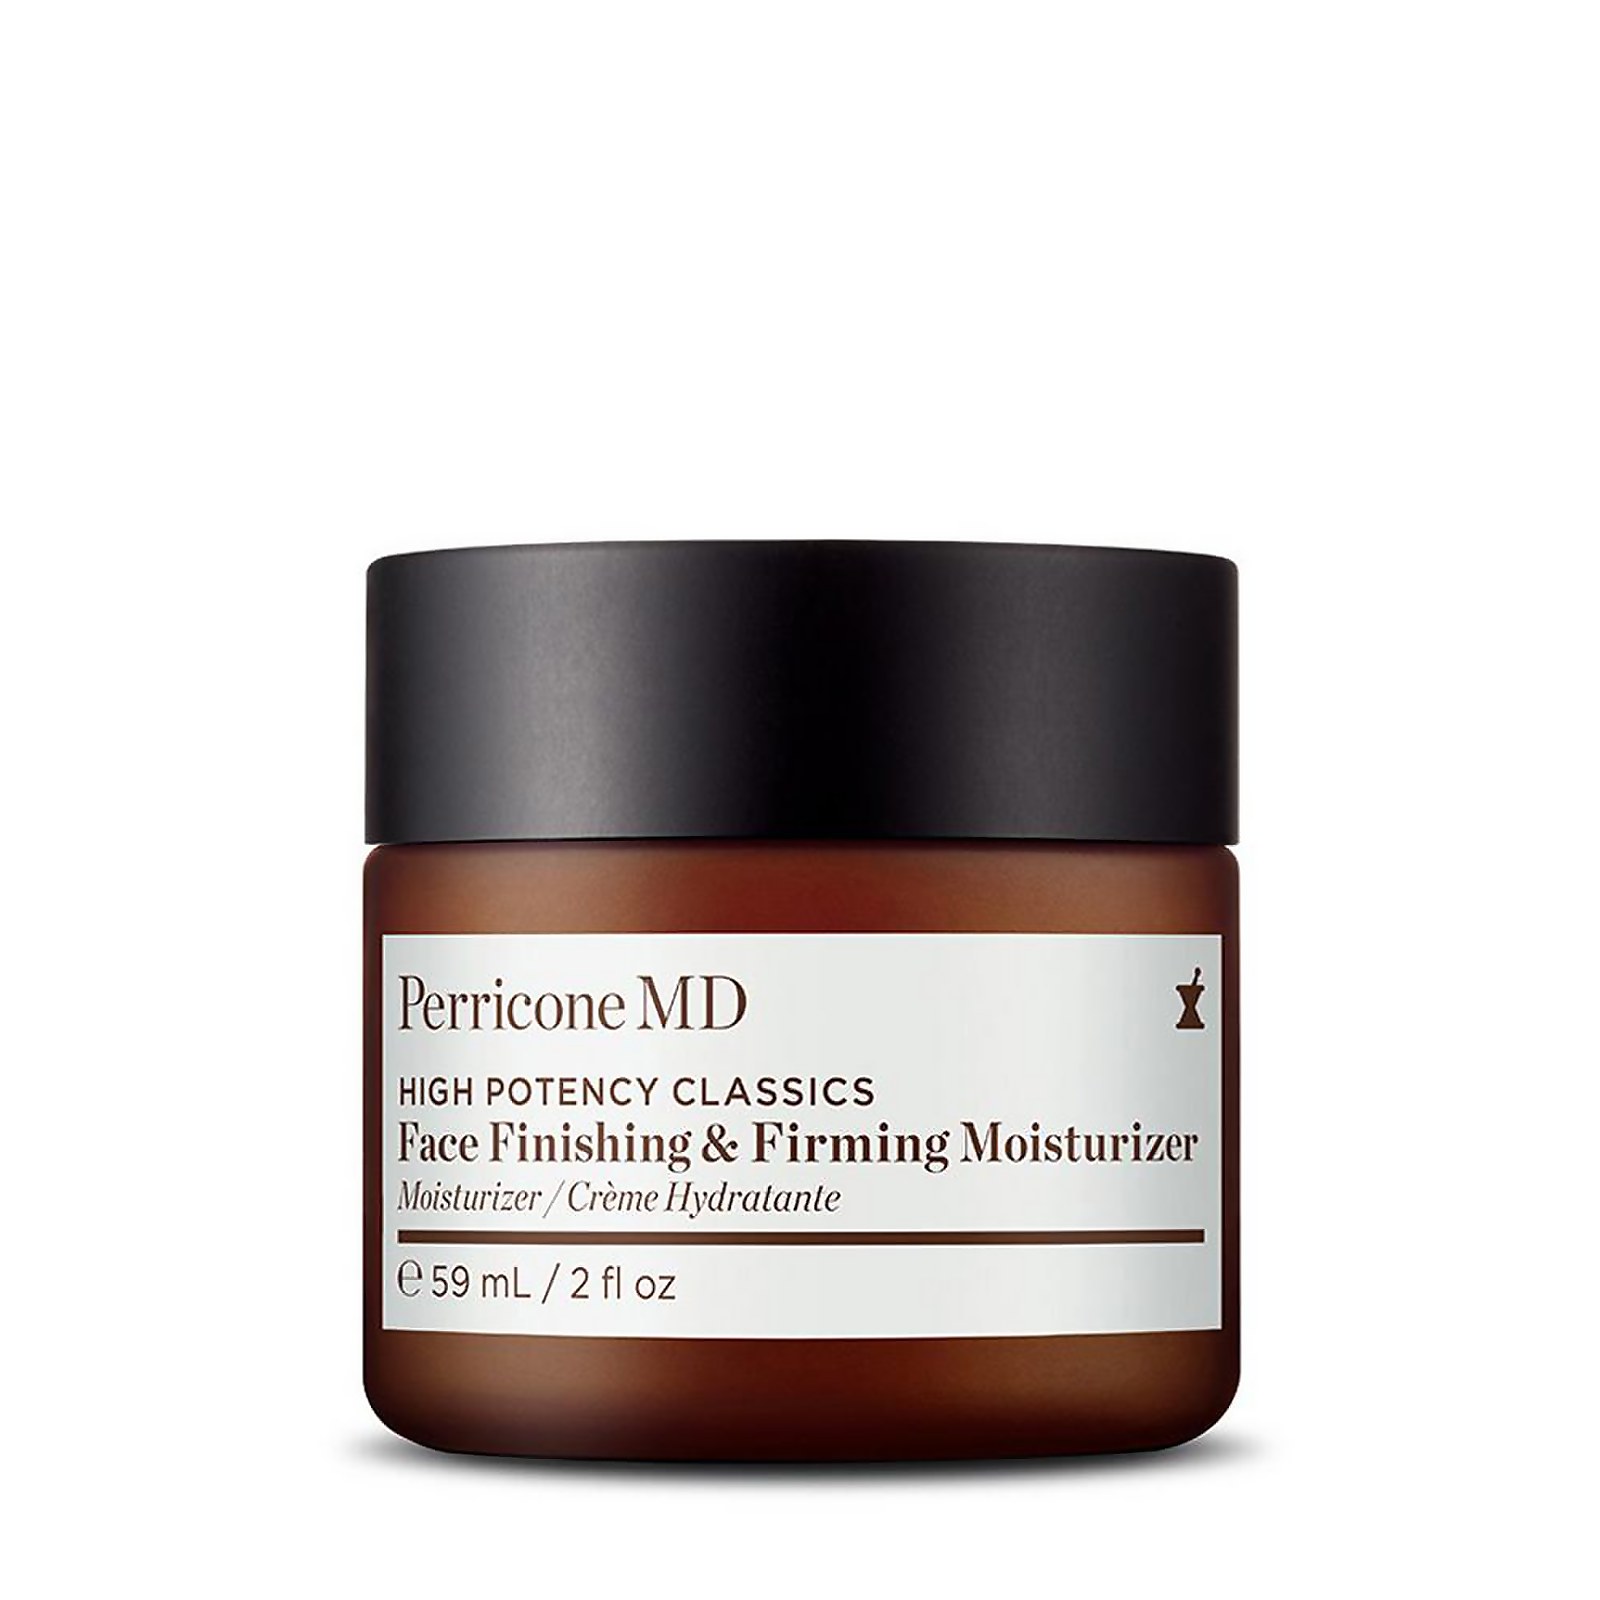 PERRICONE MD HIGH POTENCY CLASSICS FACE FINISHING & FIRMING MOISTURIZER,51090021